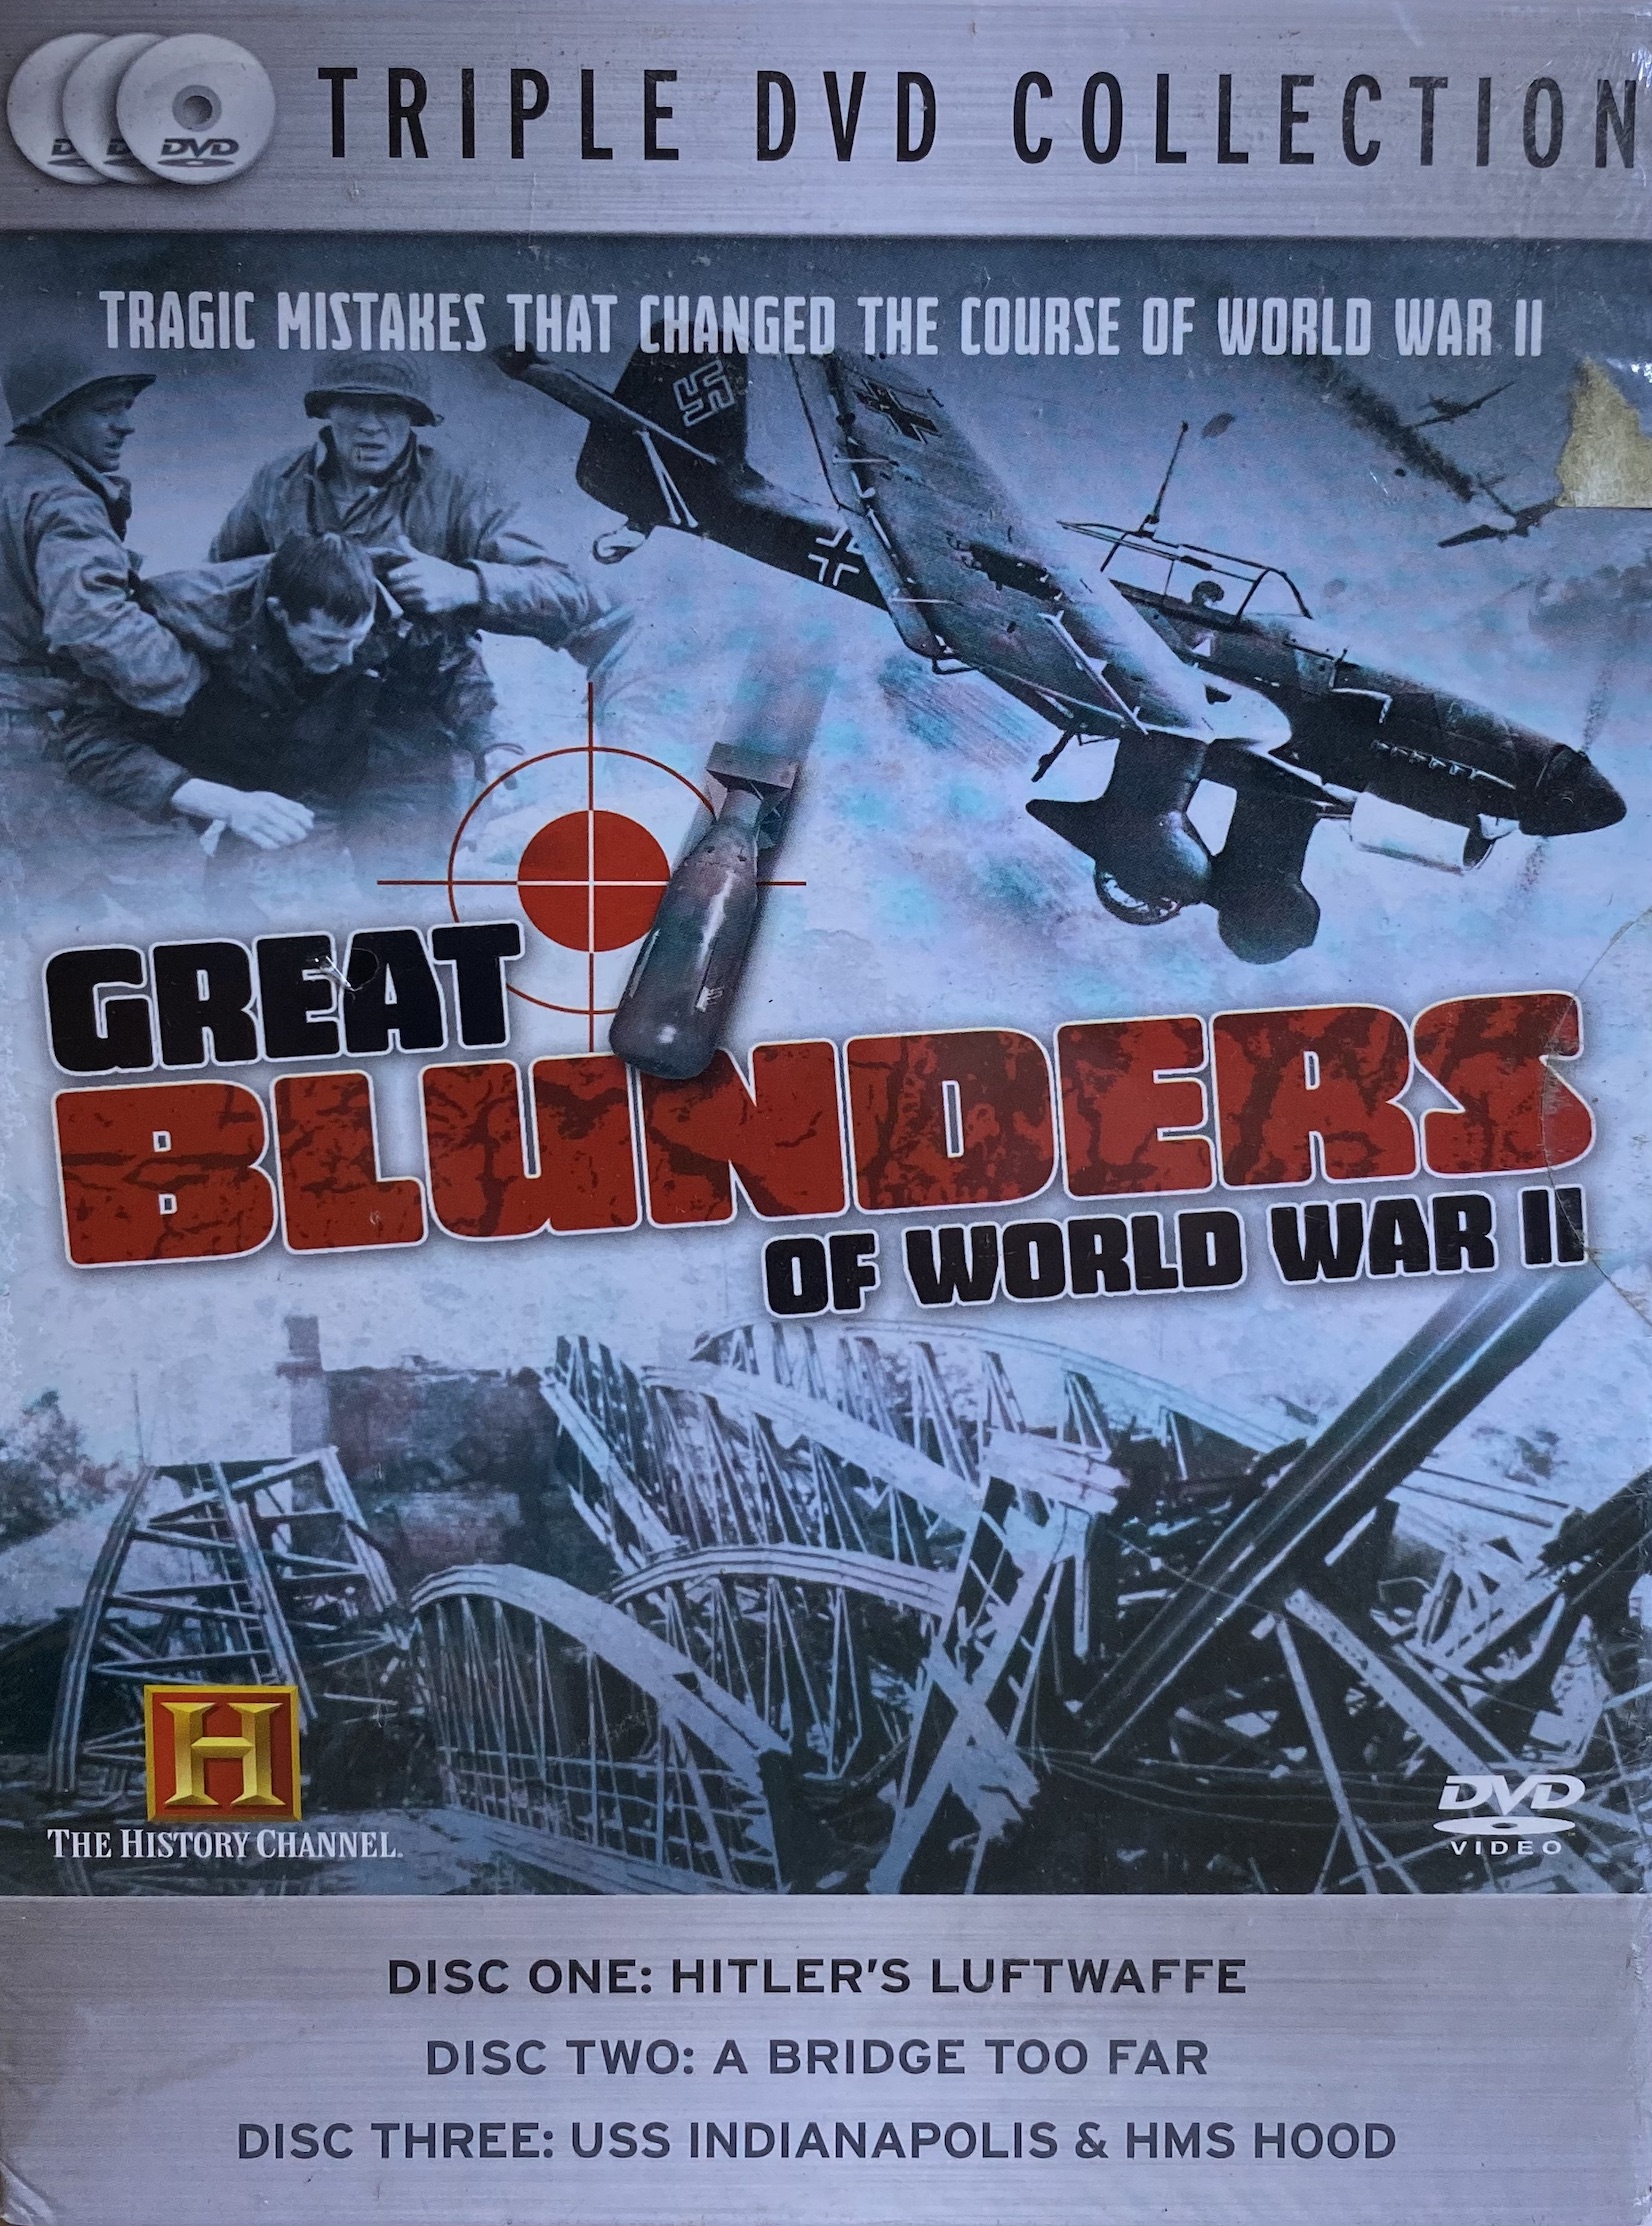 Great Blunders of WWII